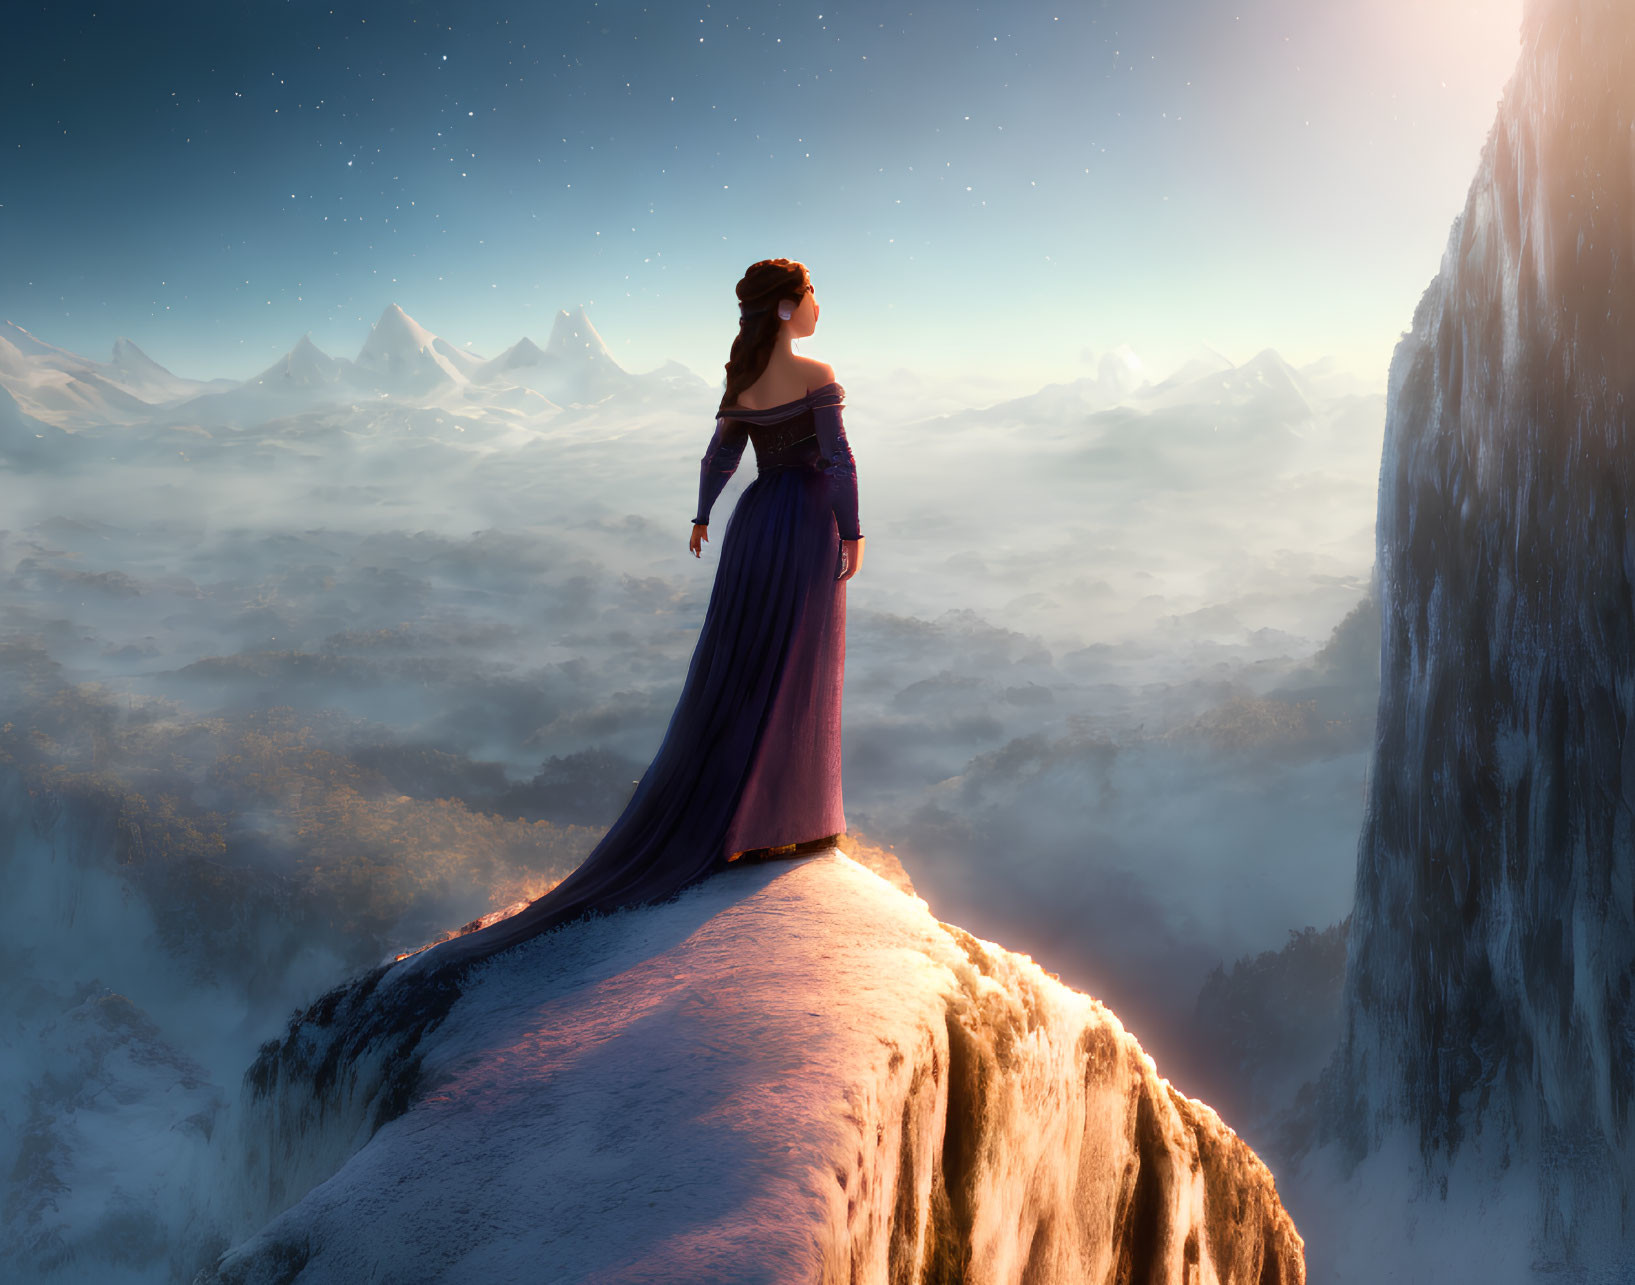 Woman in flowing purple dress on snowy cliff with mountain landscape under starry sky